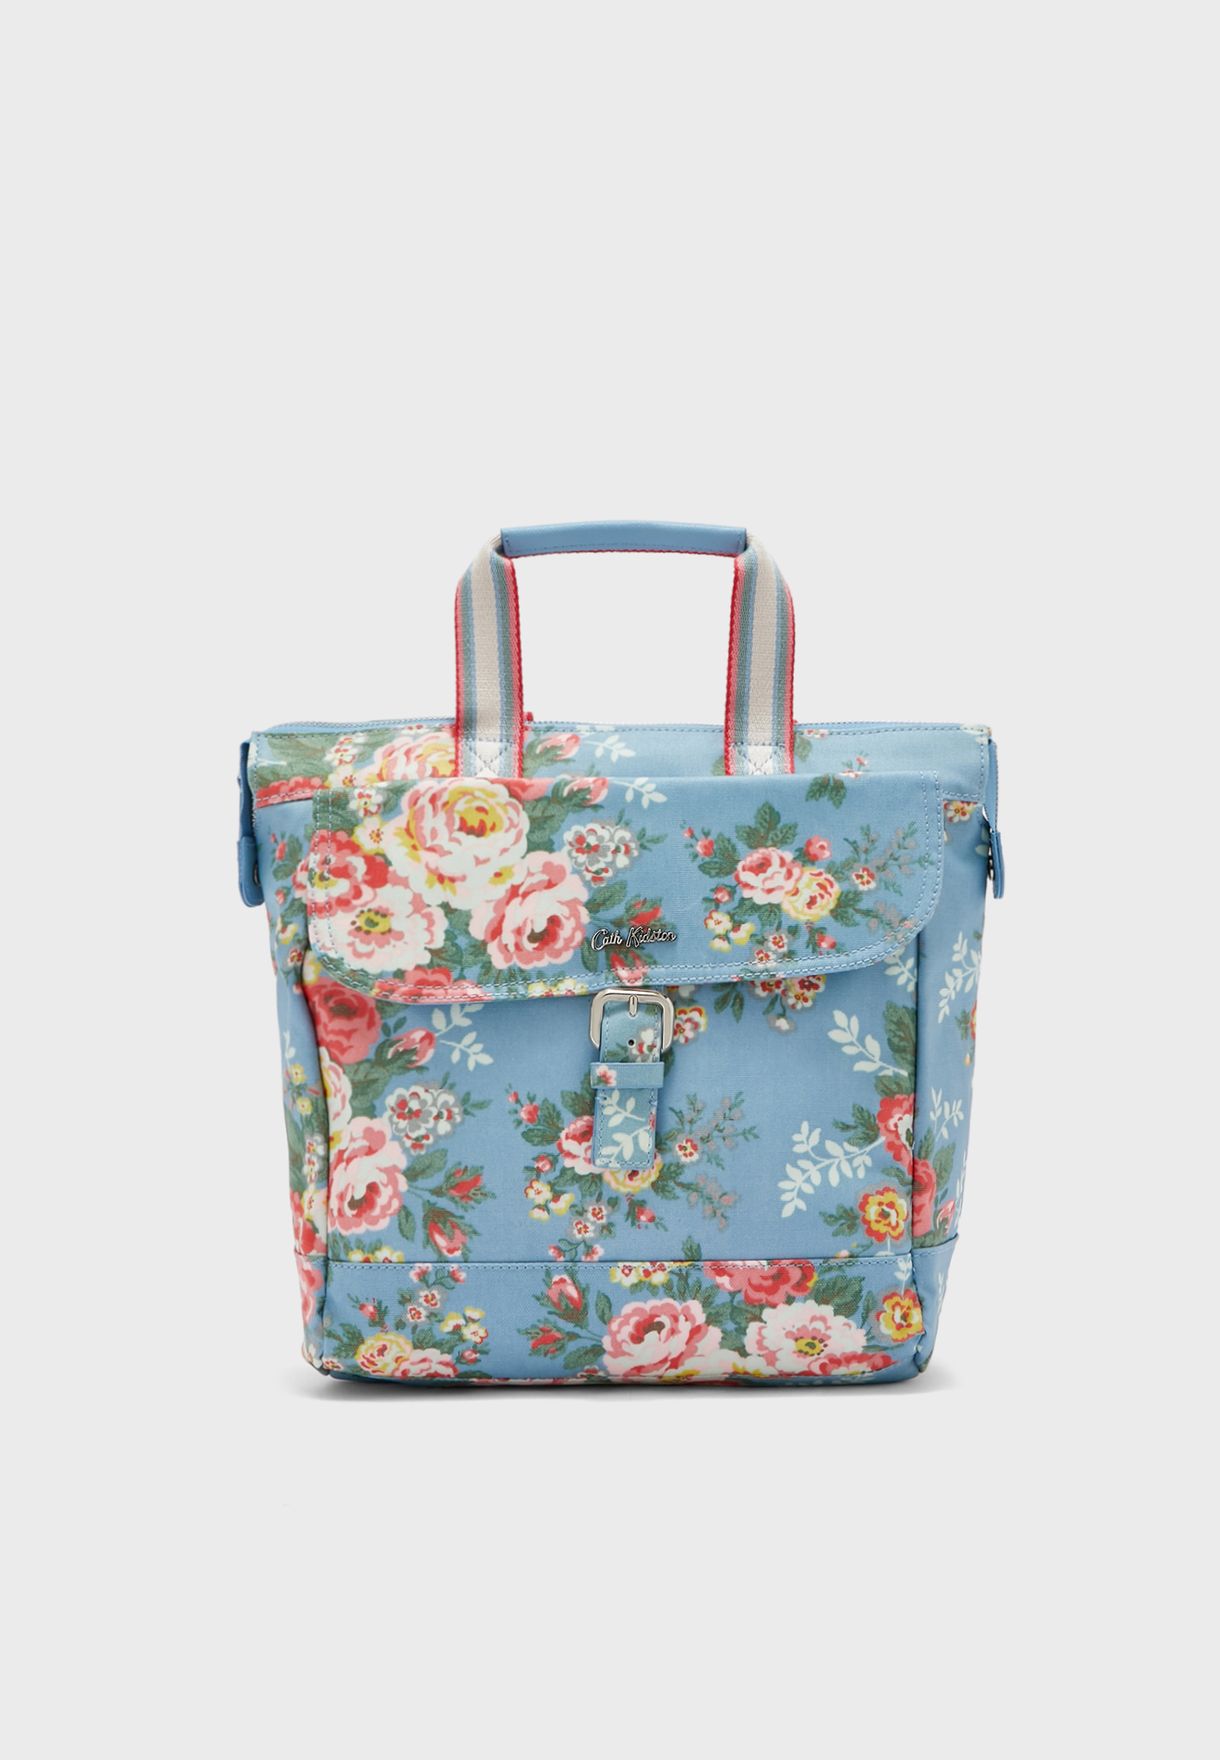 cath kidston candy flowers bag